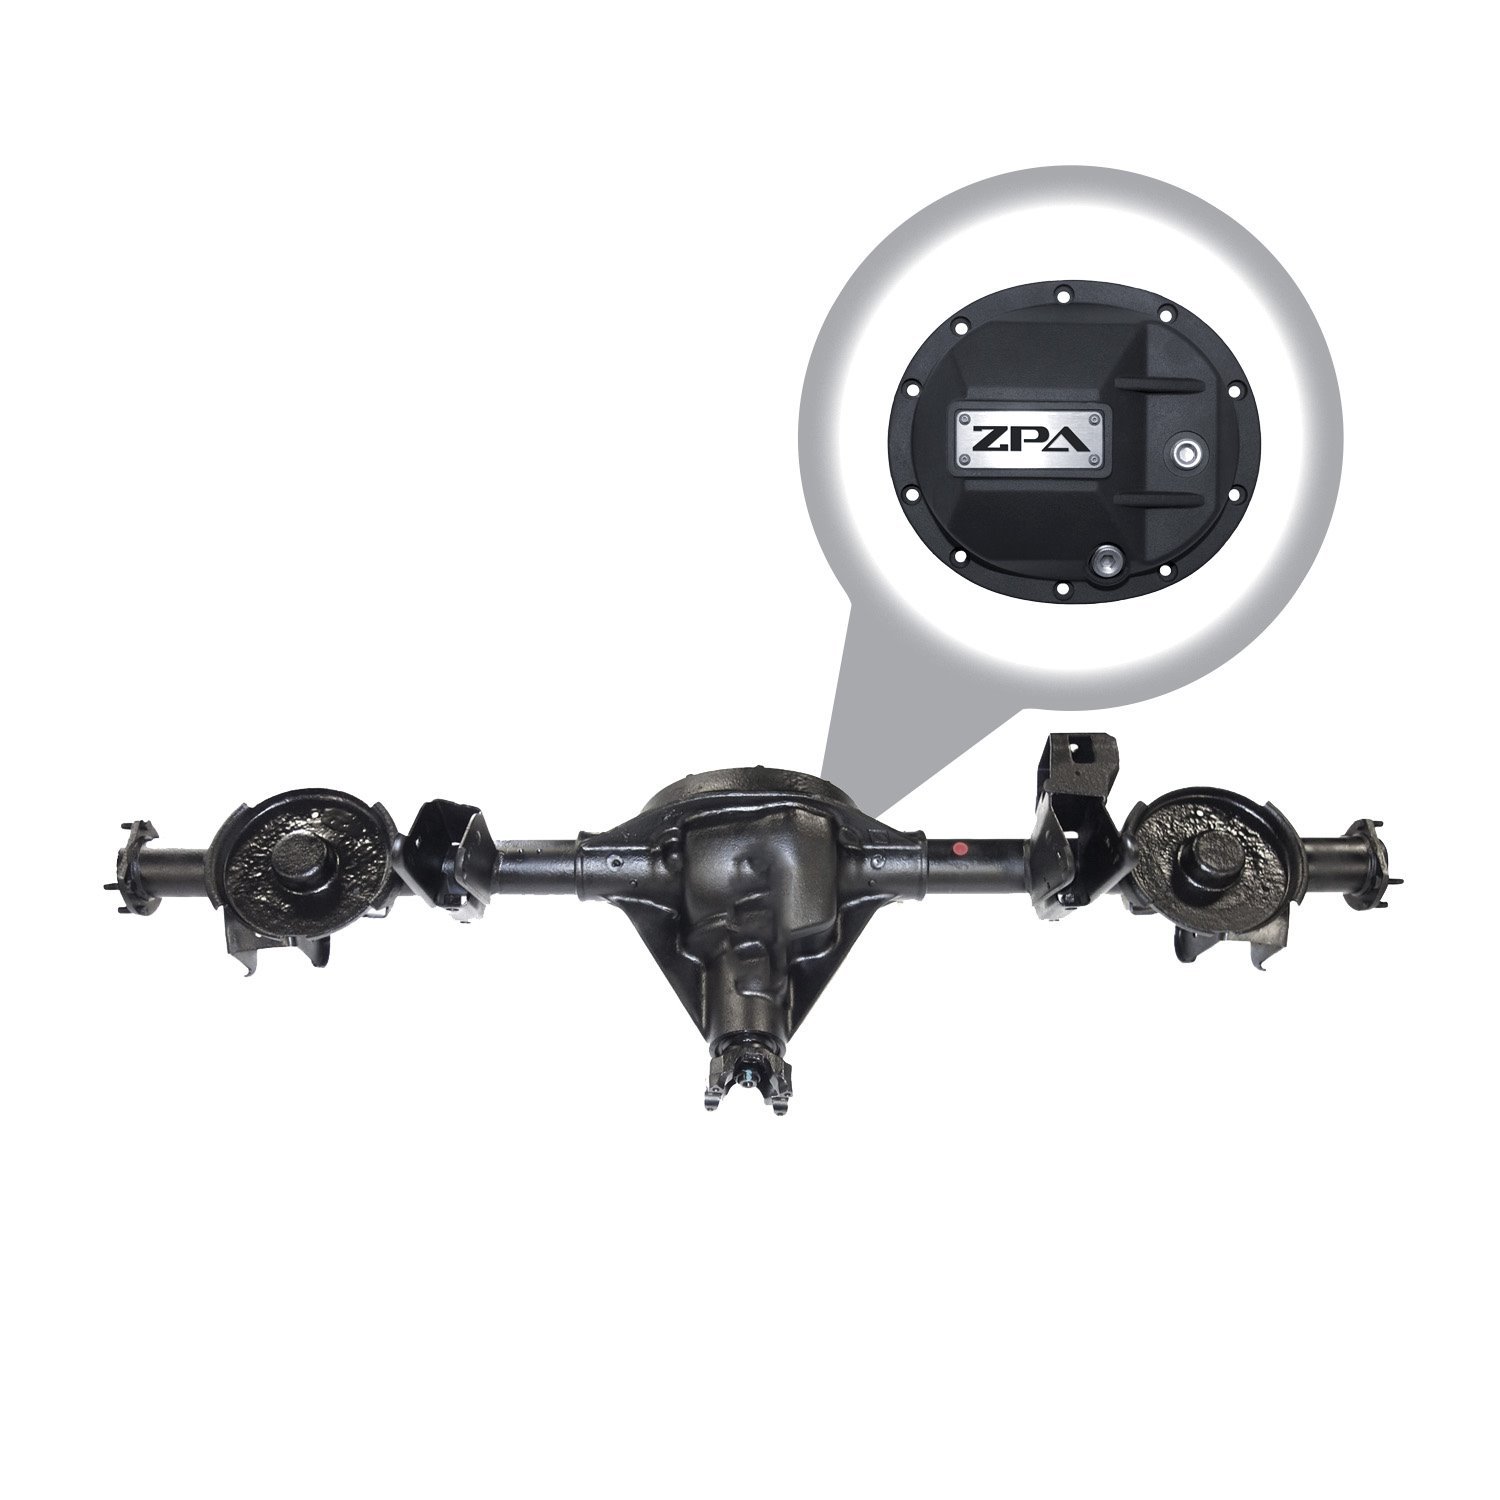 RAA435-2149X1-L Rear Axle Assembly, Dana 35, '03-'06 Jeep Wrangler (Exc Unlimited & Rubicon), 4.88 Ratio, Grizzly